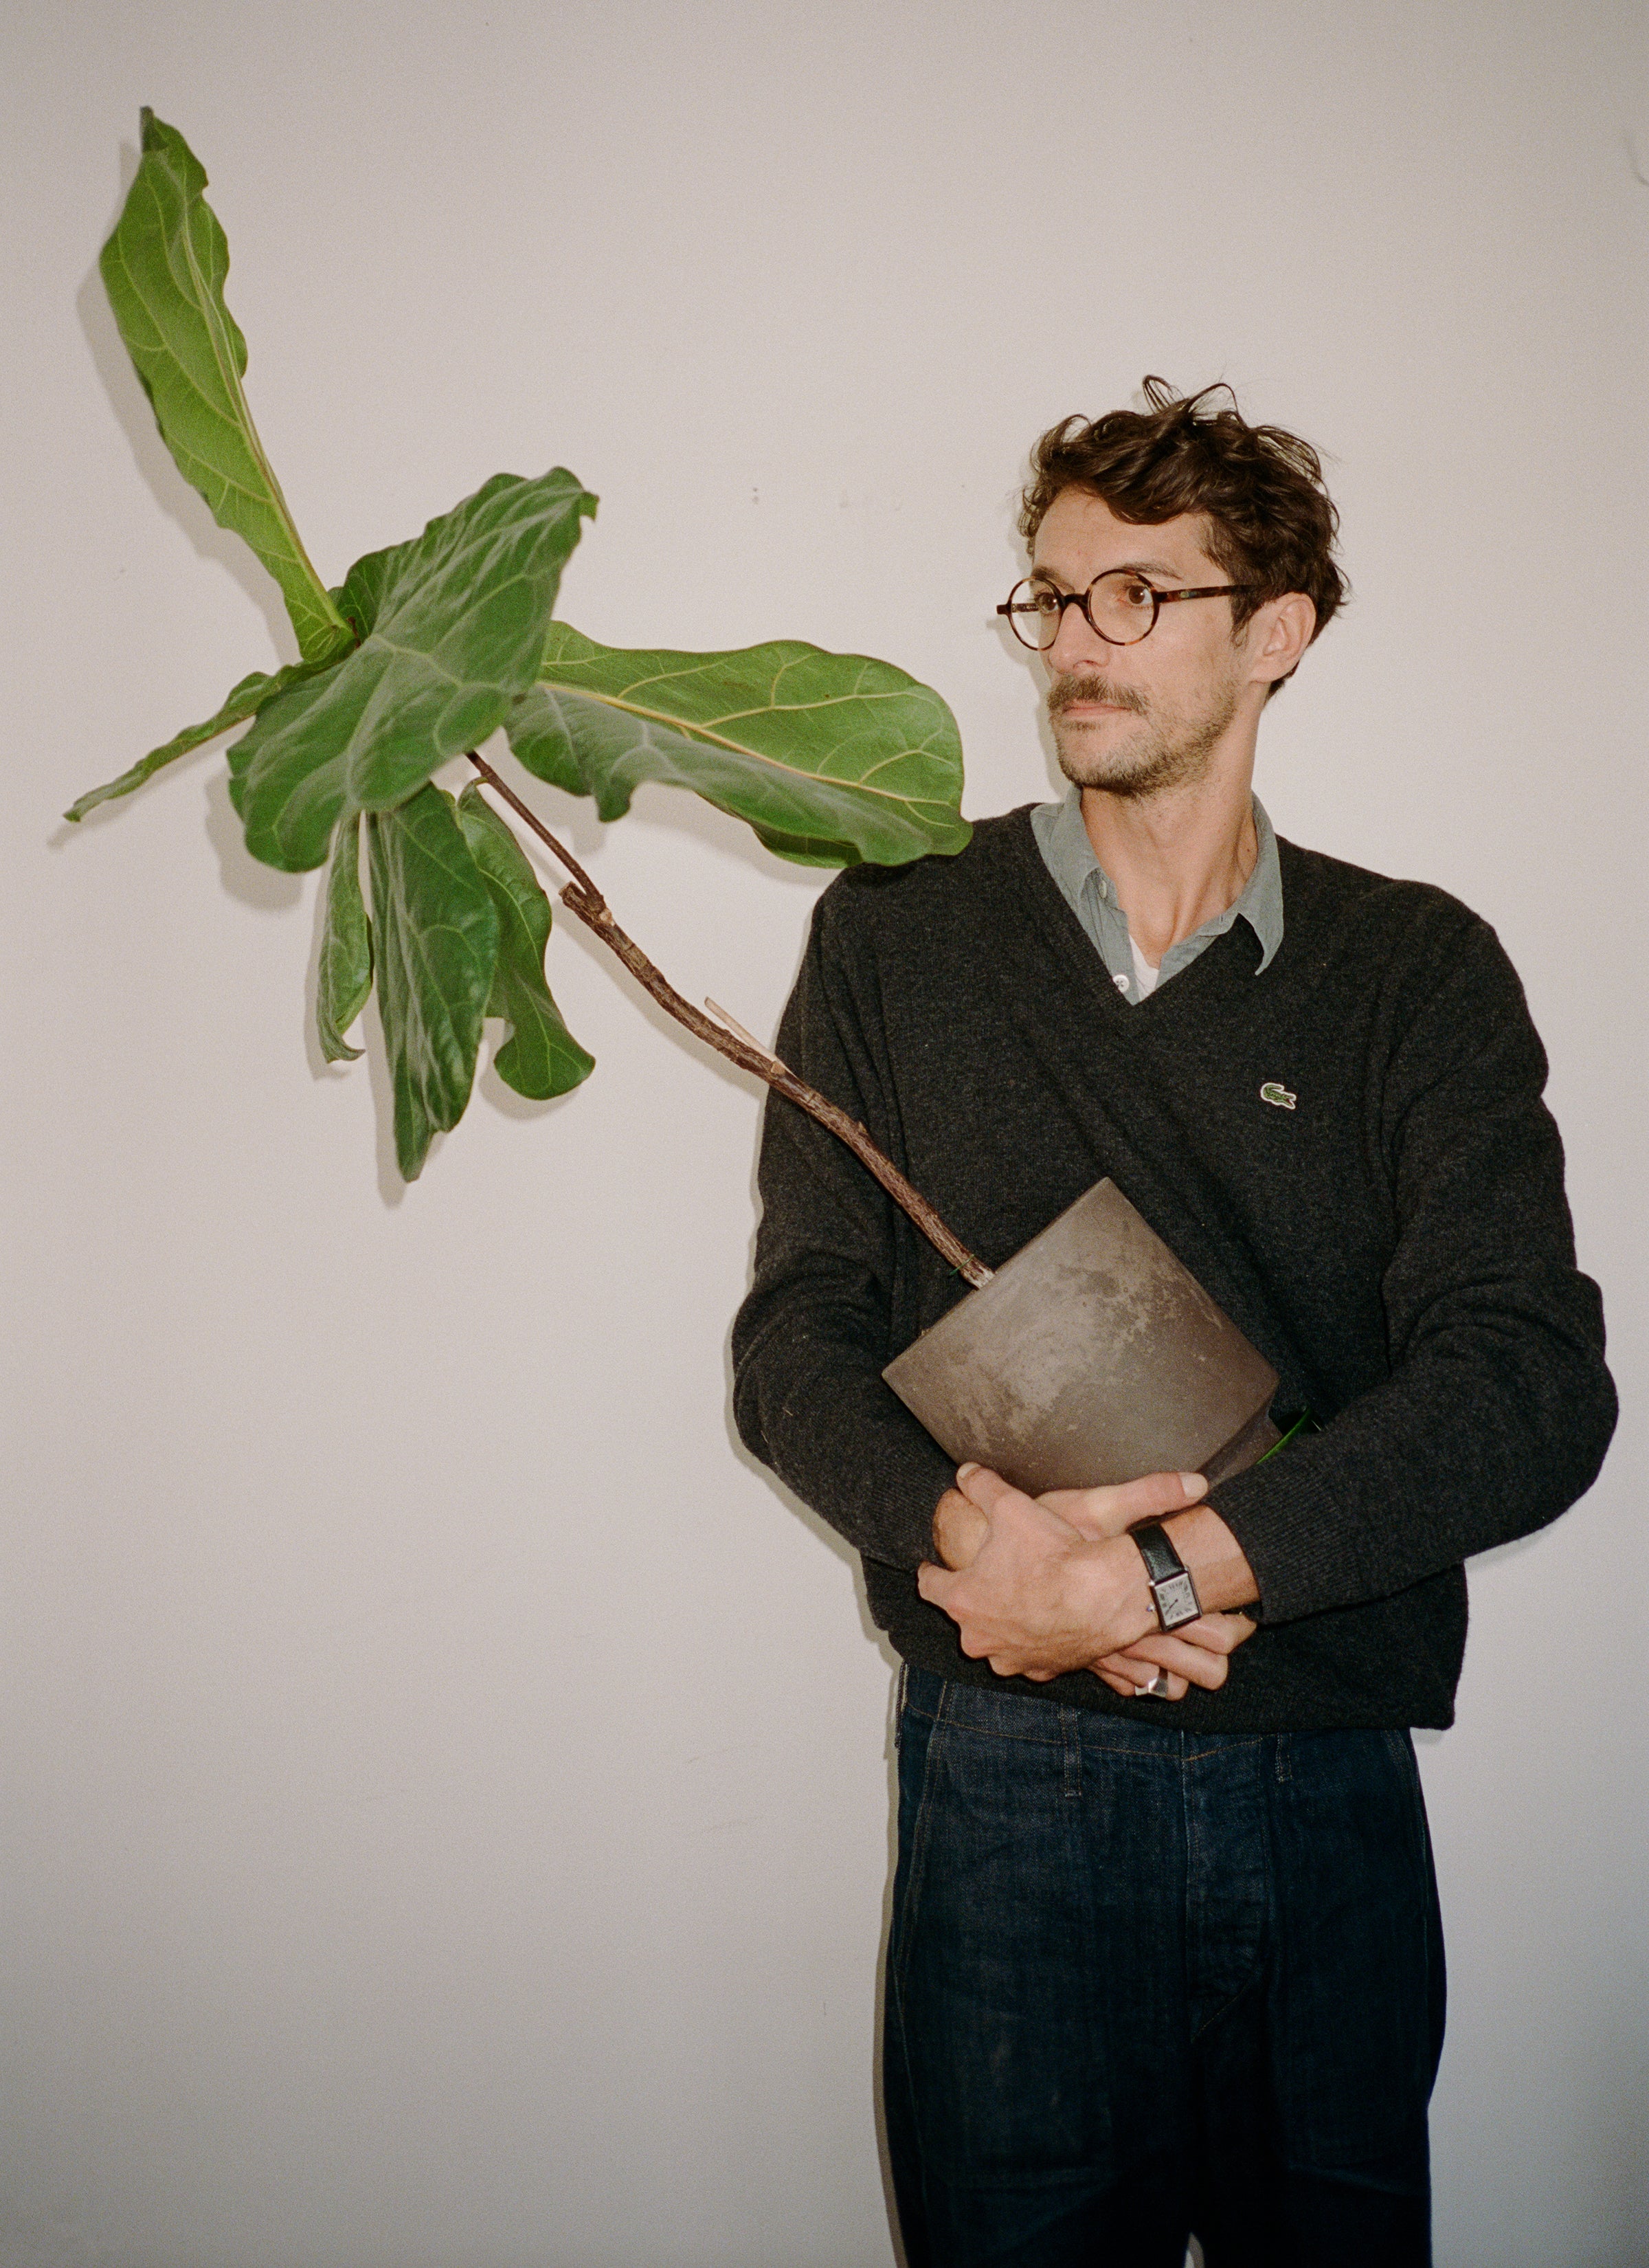 Geoffery standing in front of the white wall holding a pot of Fiddle-leaf fig and staring at it.